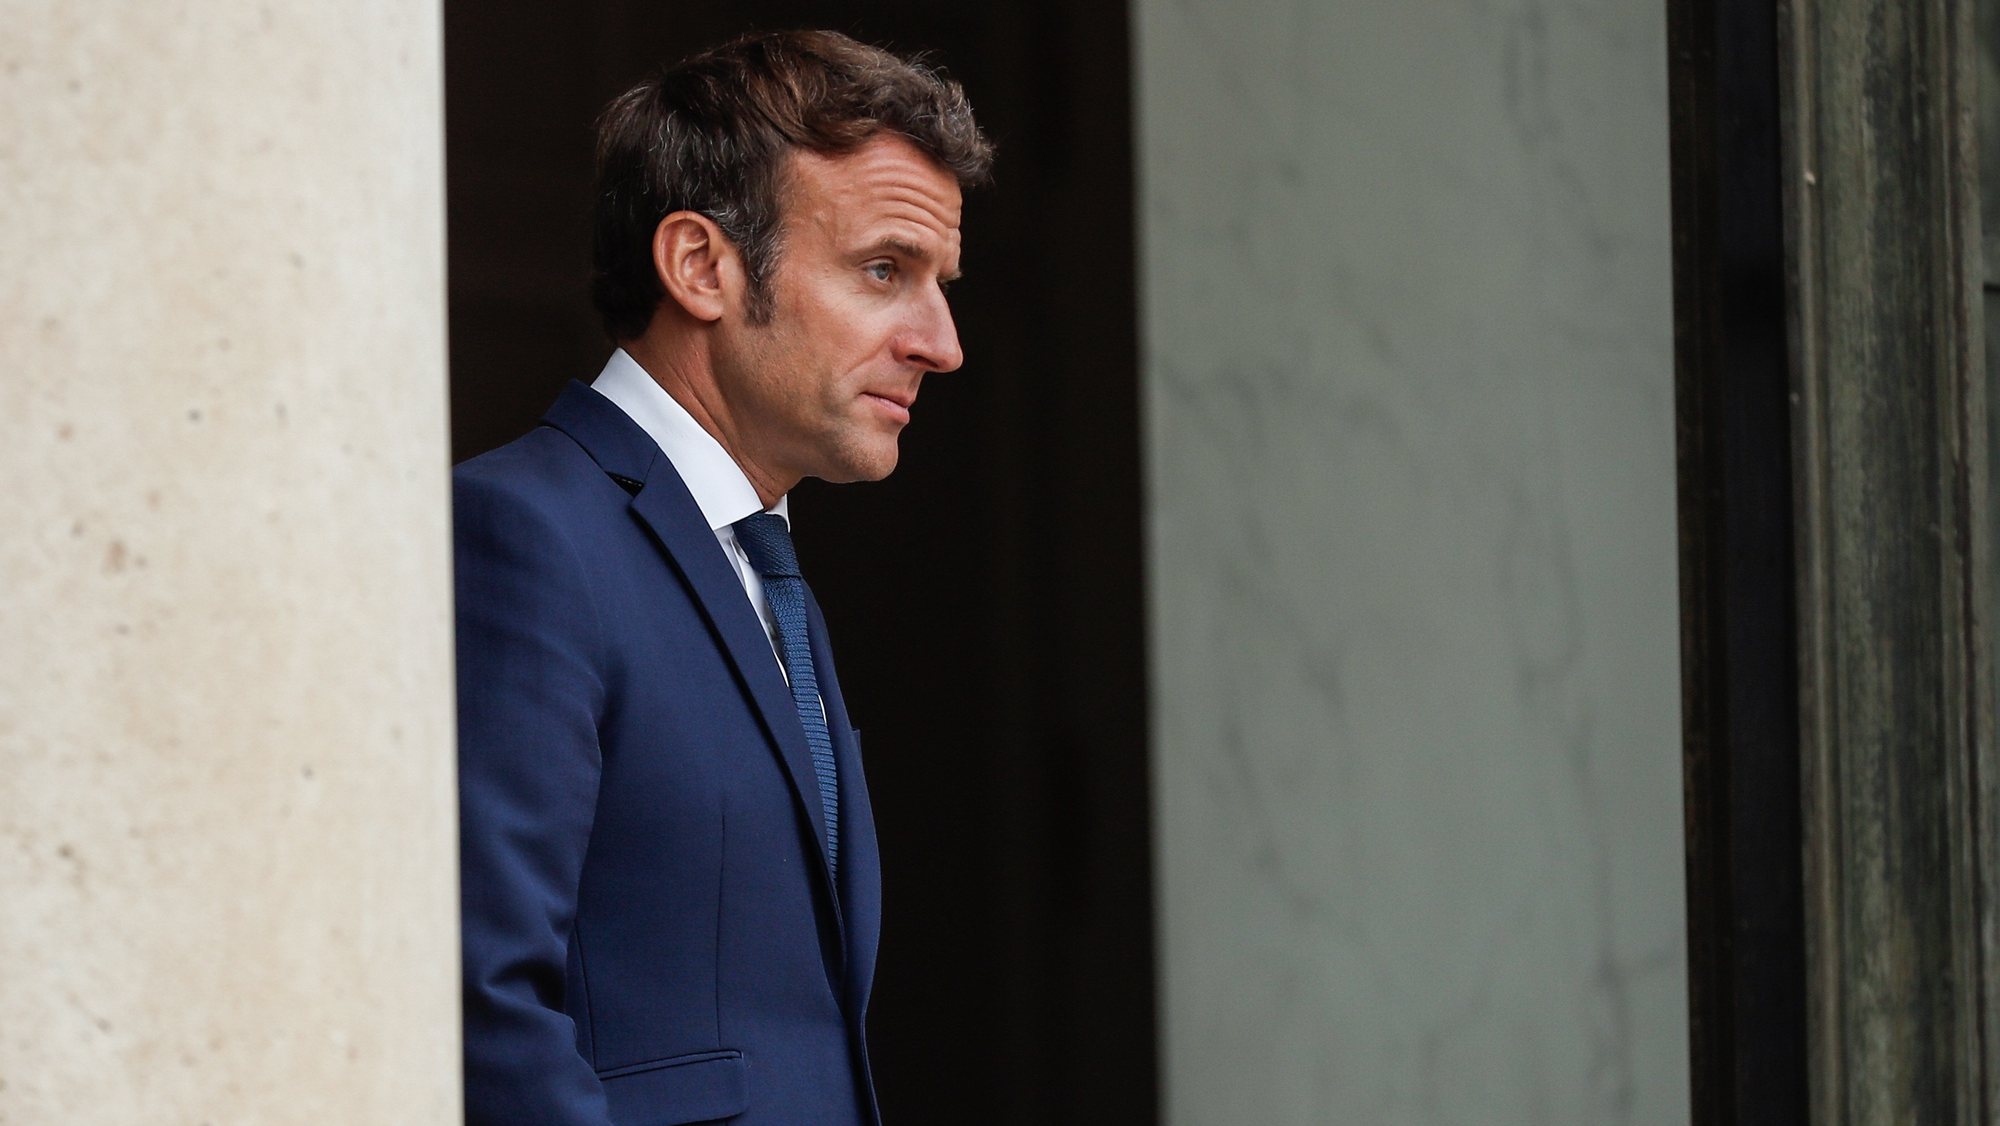 epa09993463 French President Emmanuel Macron looks on as he waits for the arrival of European Commission President Von der Leyen ahead of their meeting at the Elysee Palace in Paris, France, 03 June 2022.  EPA/CHRISTOPHE PETIT-TESSON